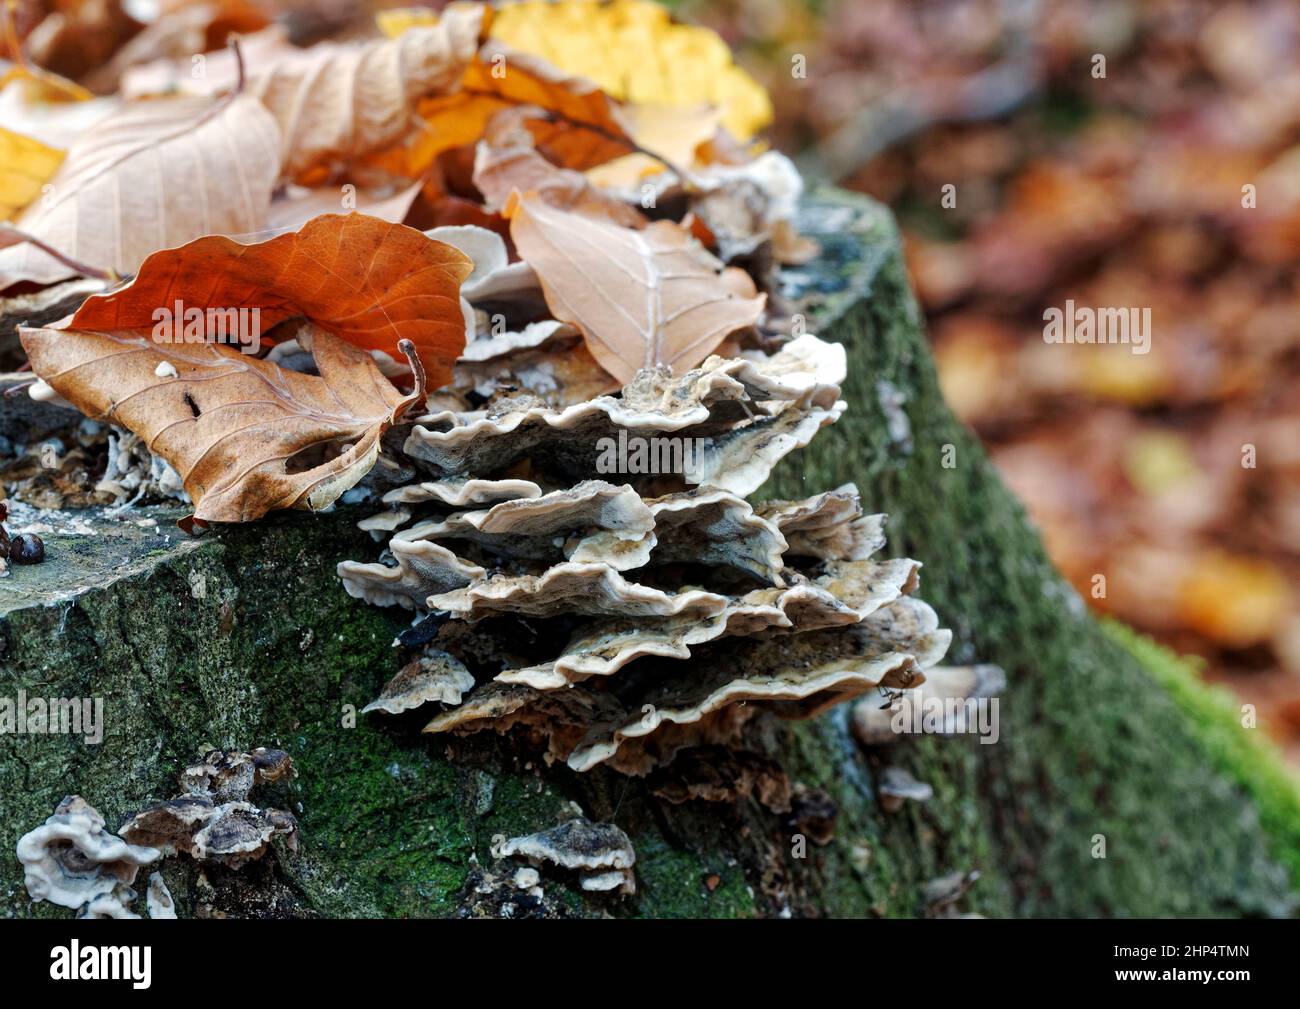 Turkey Tail (Trametese Versicolor) bracket fungi growing on a tree stump with golden autumnal beech leaves scattered around. Stock Photo